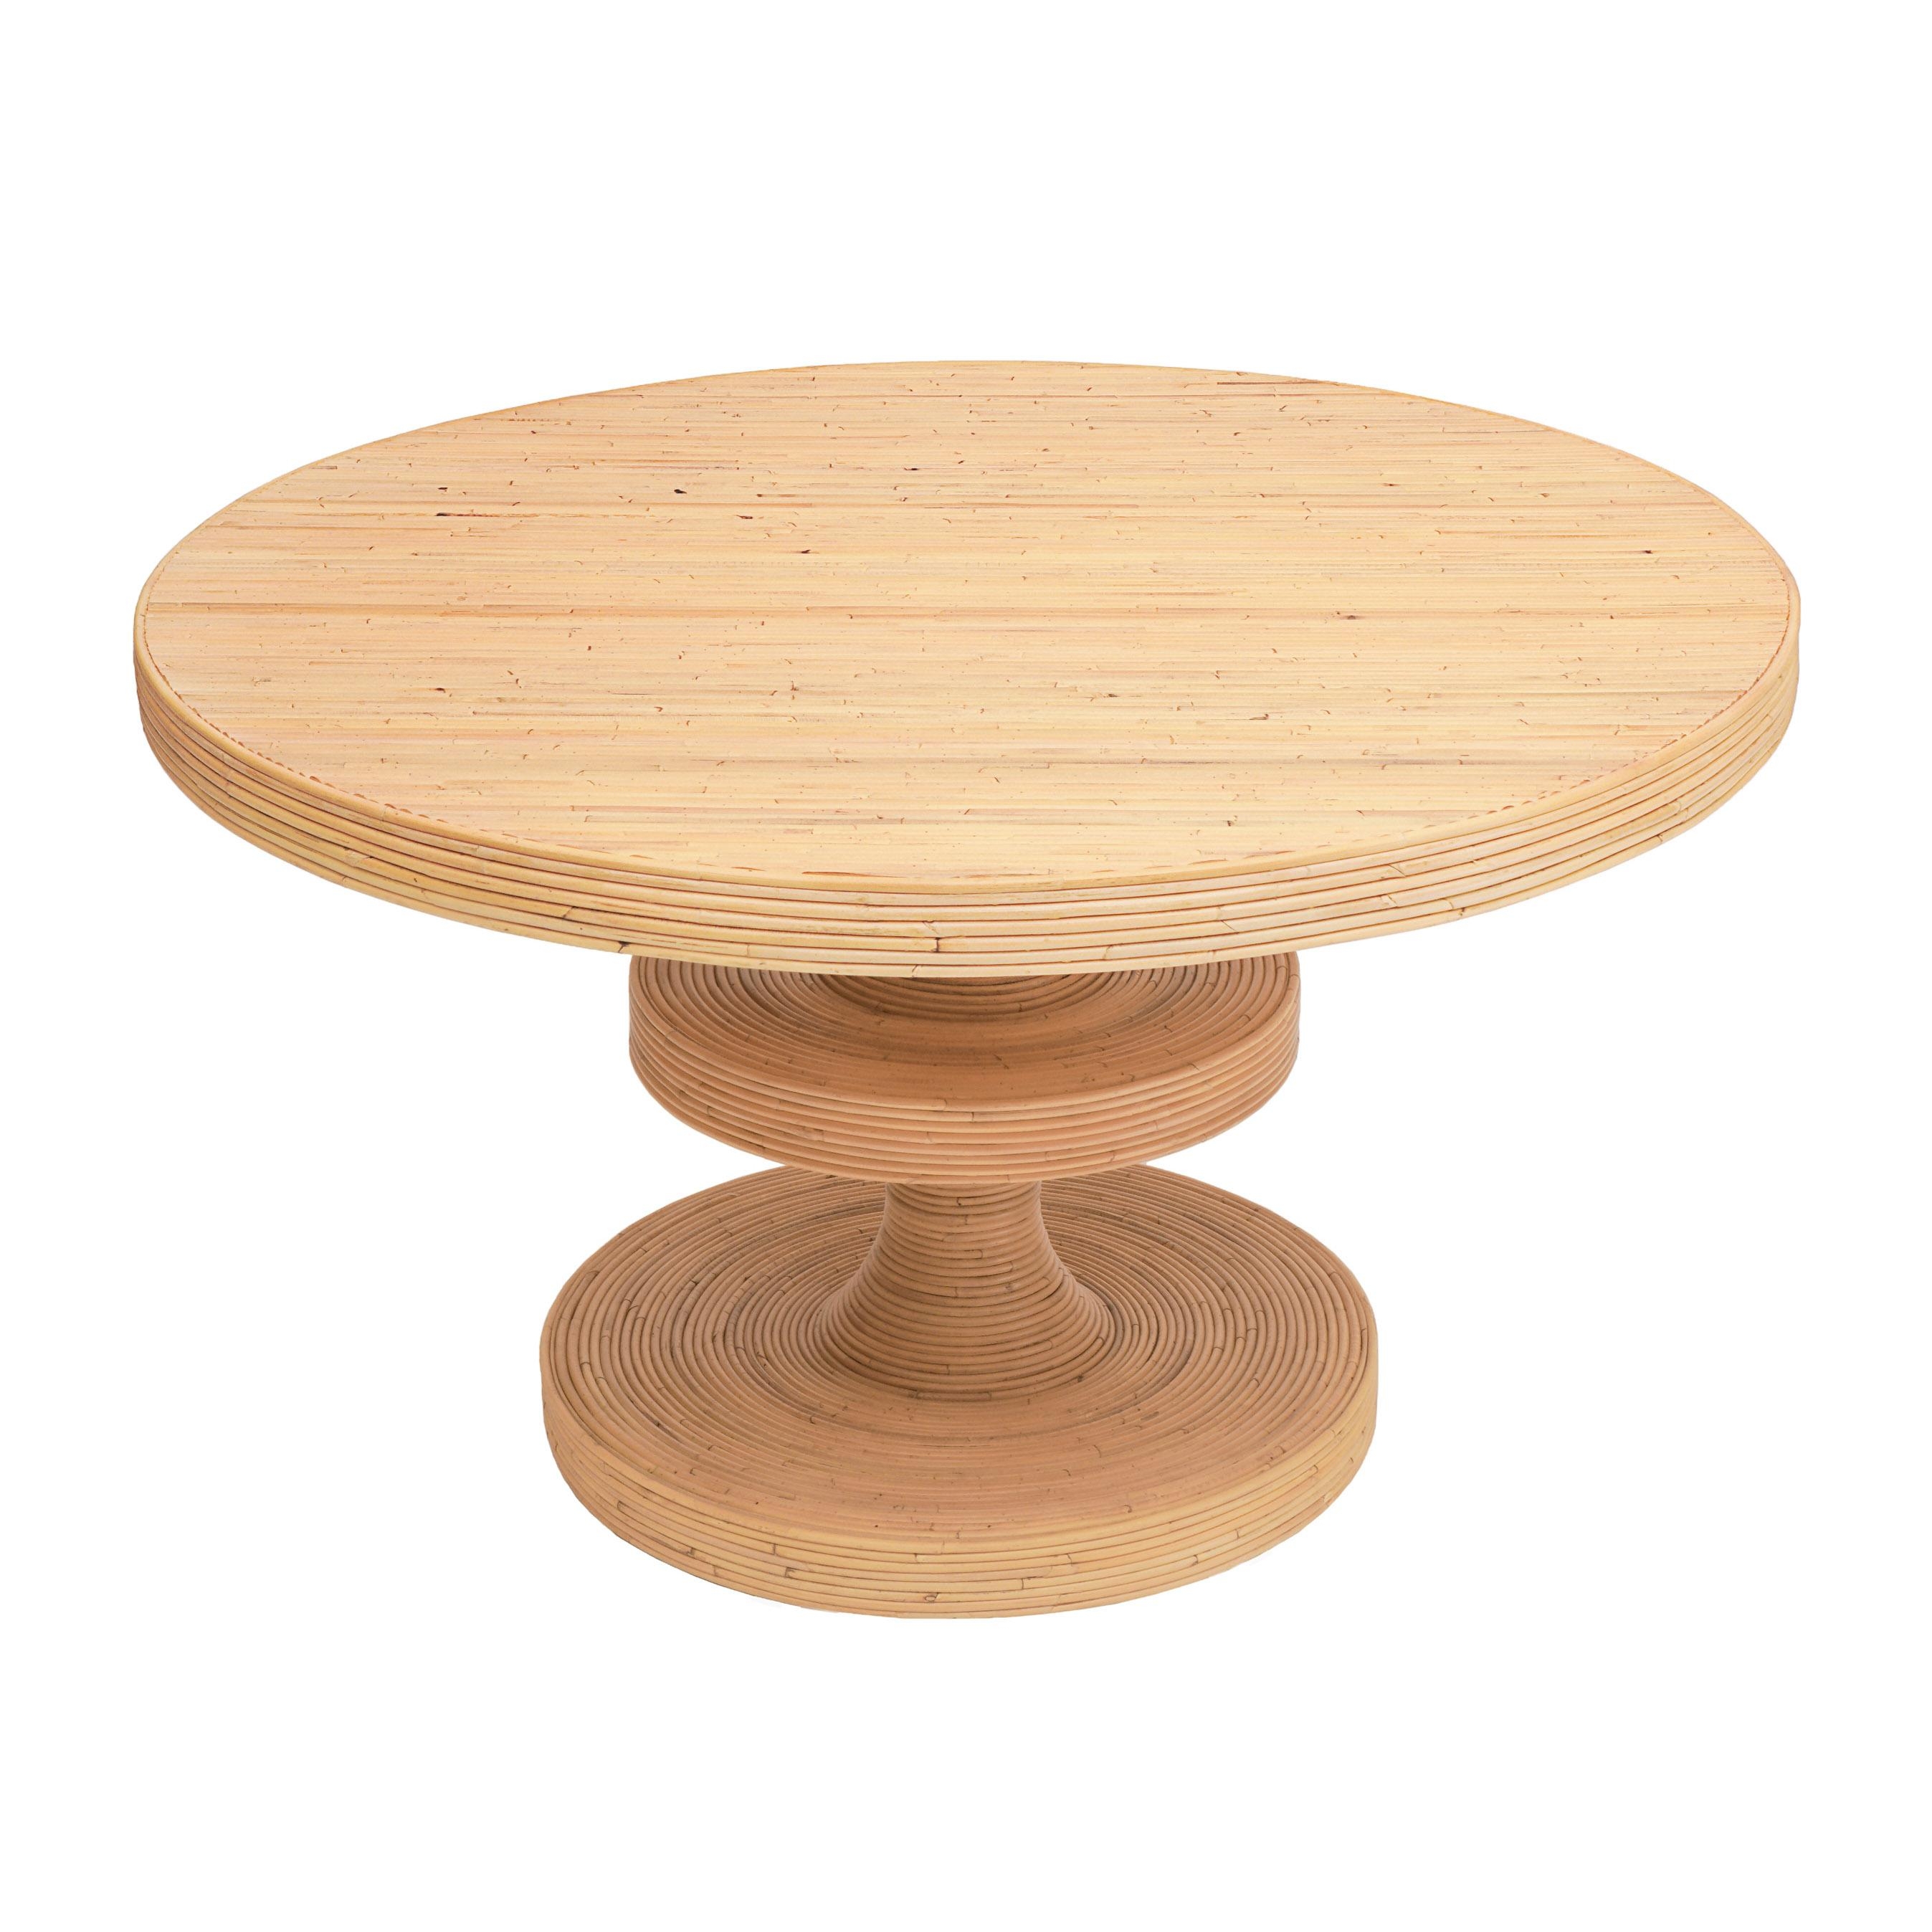 Apollonia Natural Rattan Round Dining Table - Image 4